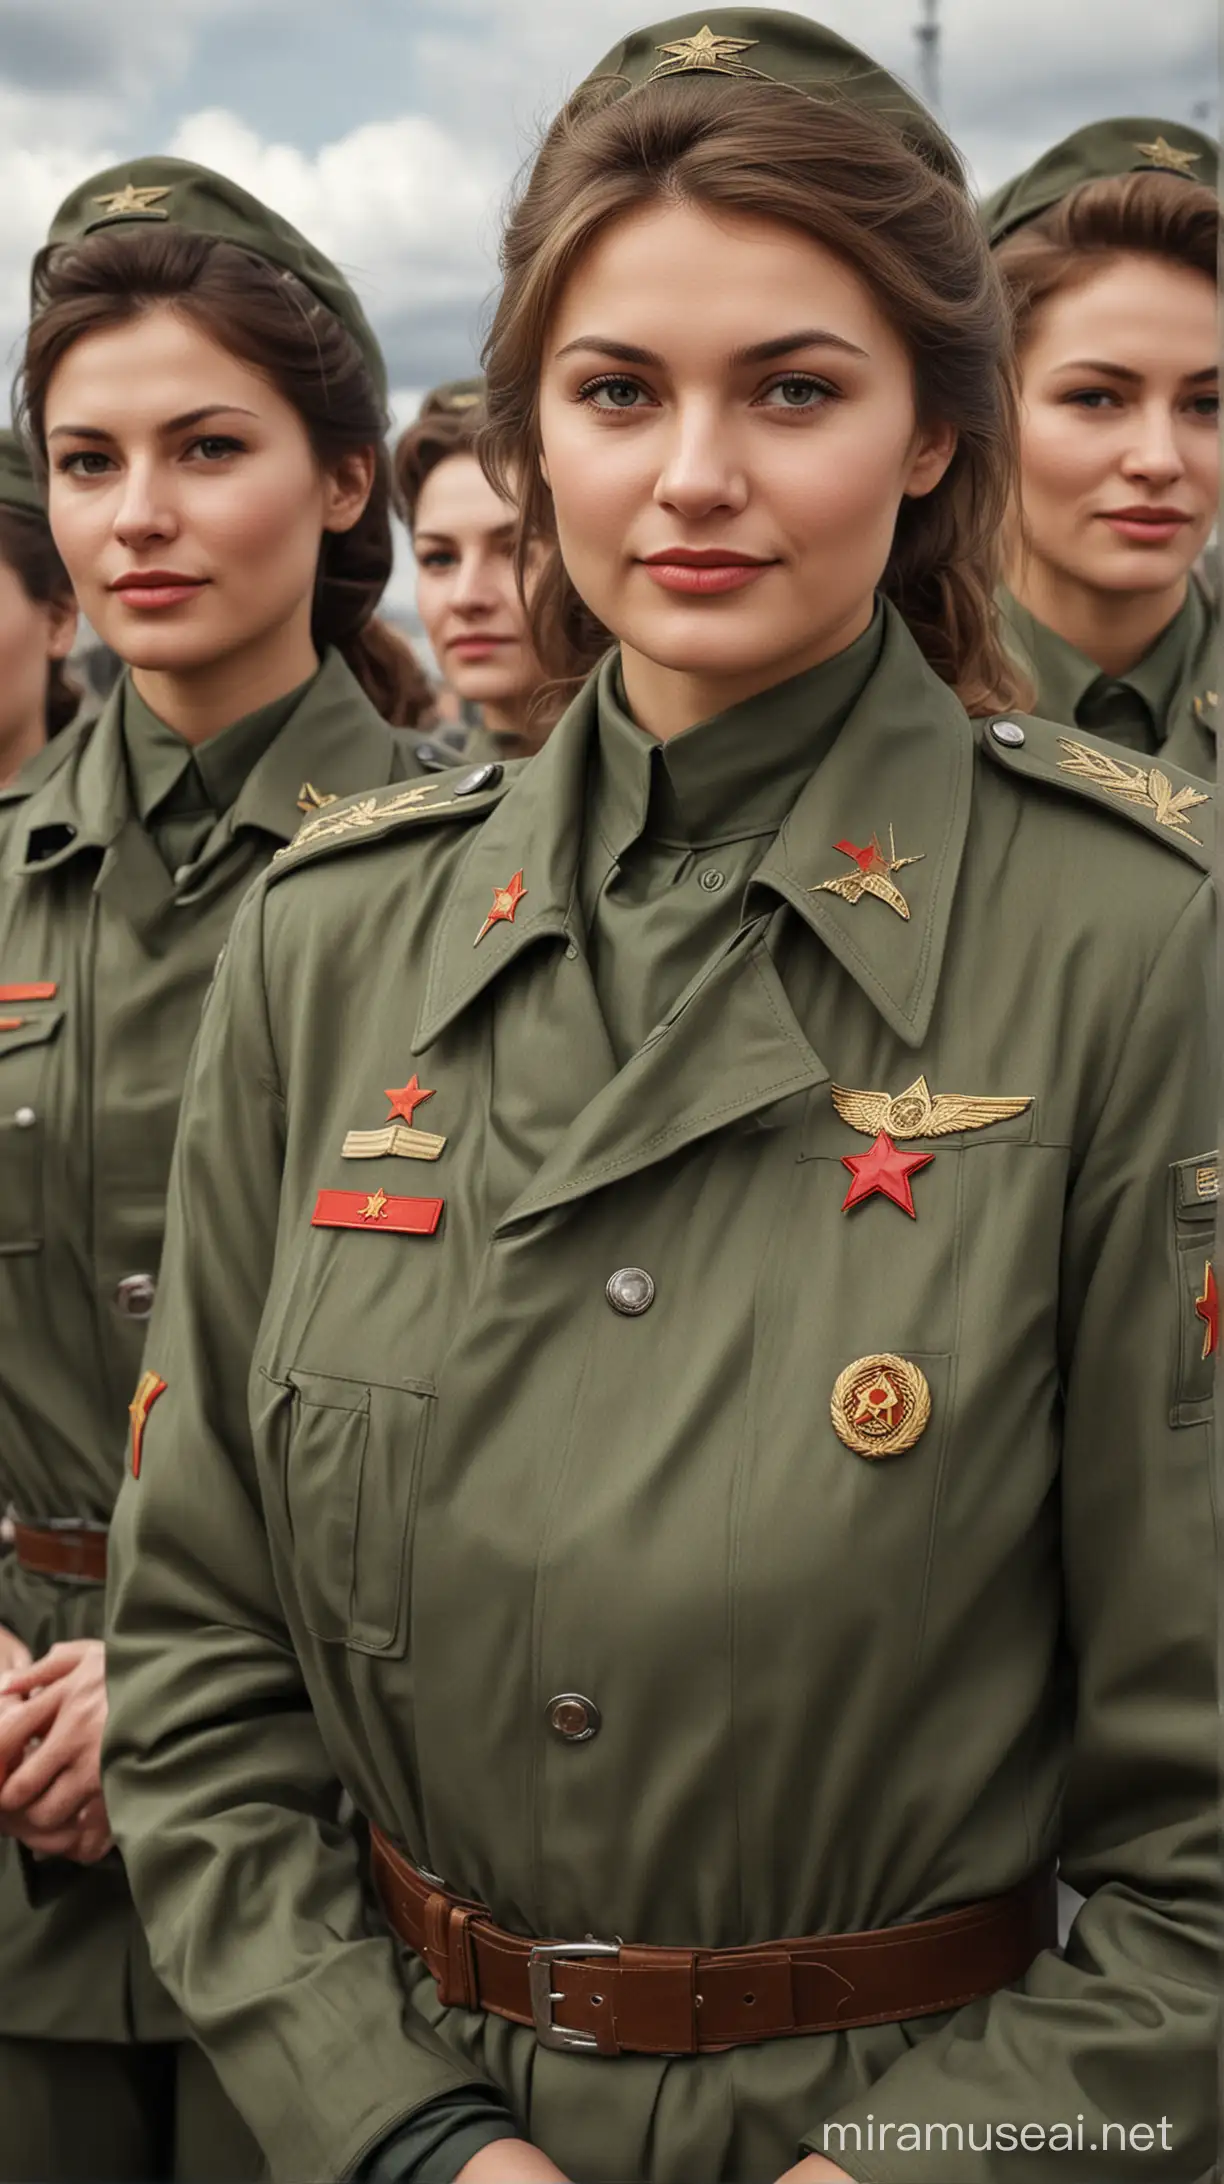 Hyper Realistic Depiction of Soviet Officials Recruiting Female Pilots for AllFemale Squadron